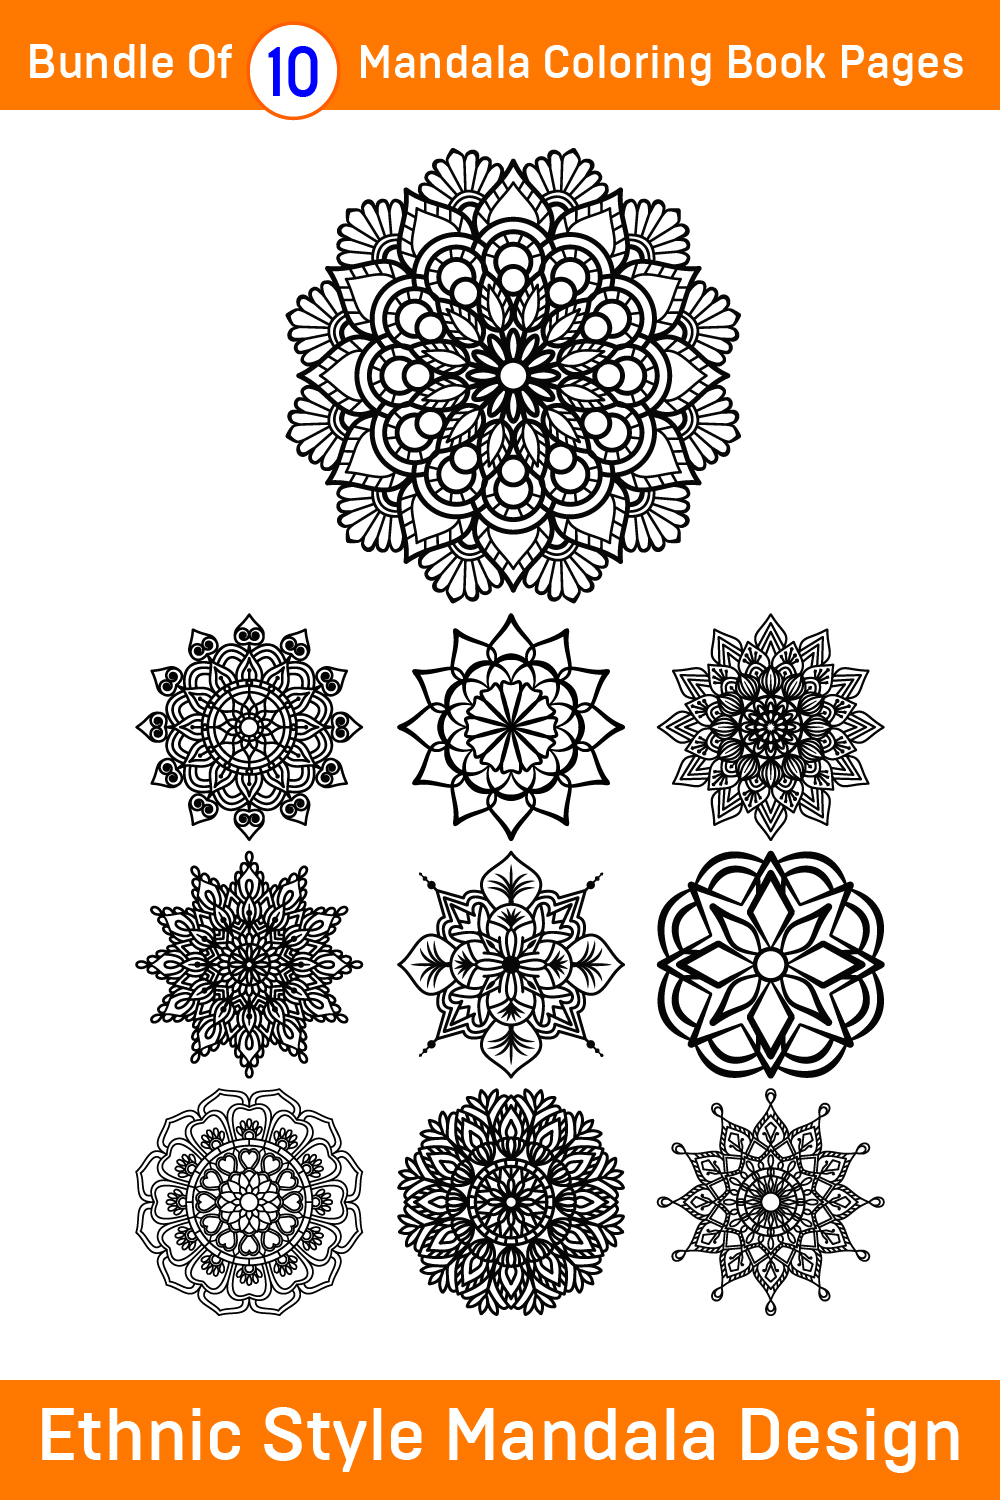 Bundle of 10 Ethnic Style Mandalas for Paper Cutting or Coloring Book Pages pinterest preview image.